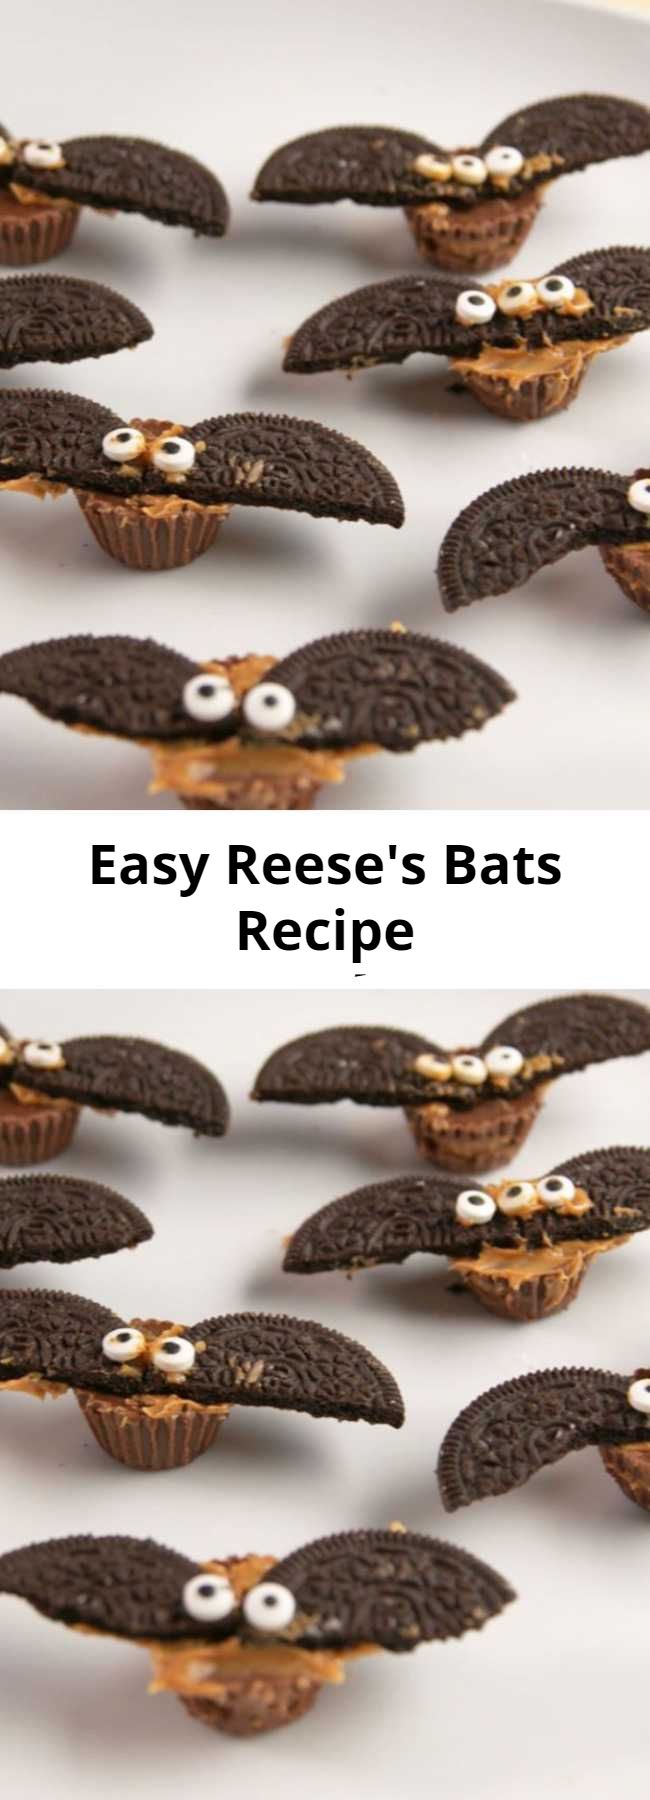 Easy Reese's Bats Recipe - These will fly away at your next Halloween party! #easy #recipe #reeses #bats #halloweenideas #halloween #halloweenfood #candy #chocolate #peanutbutter #oreo